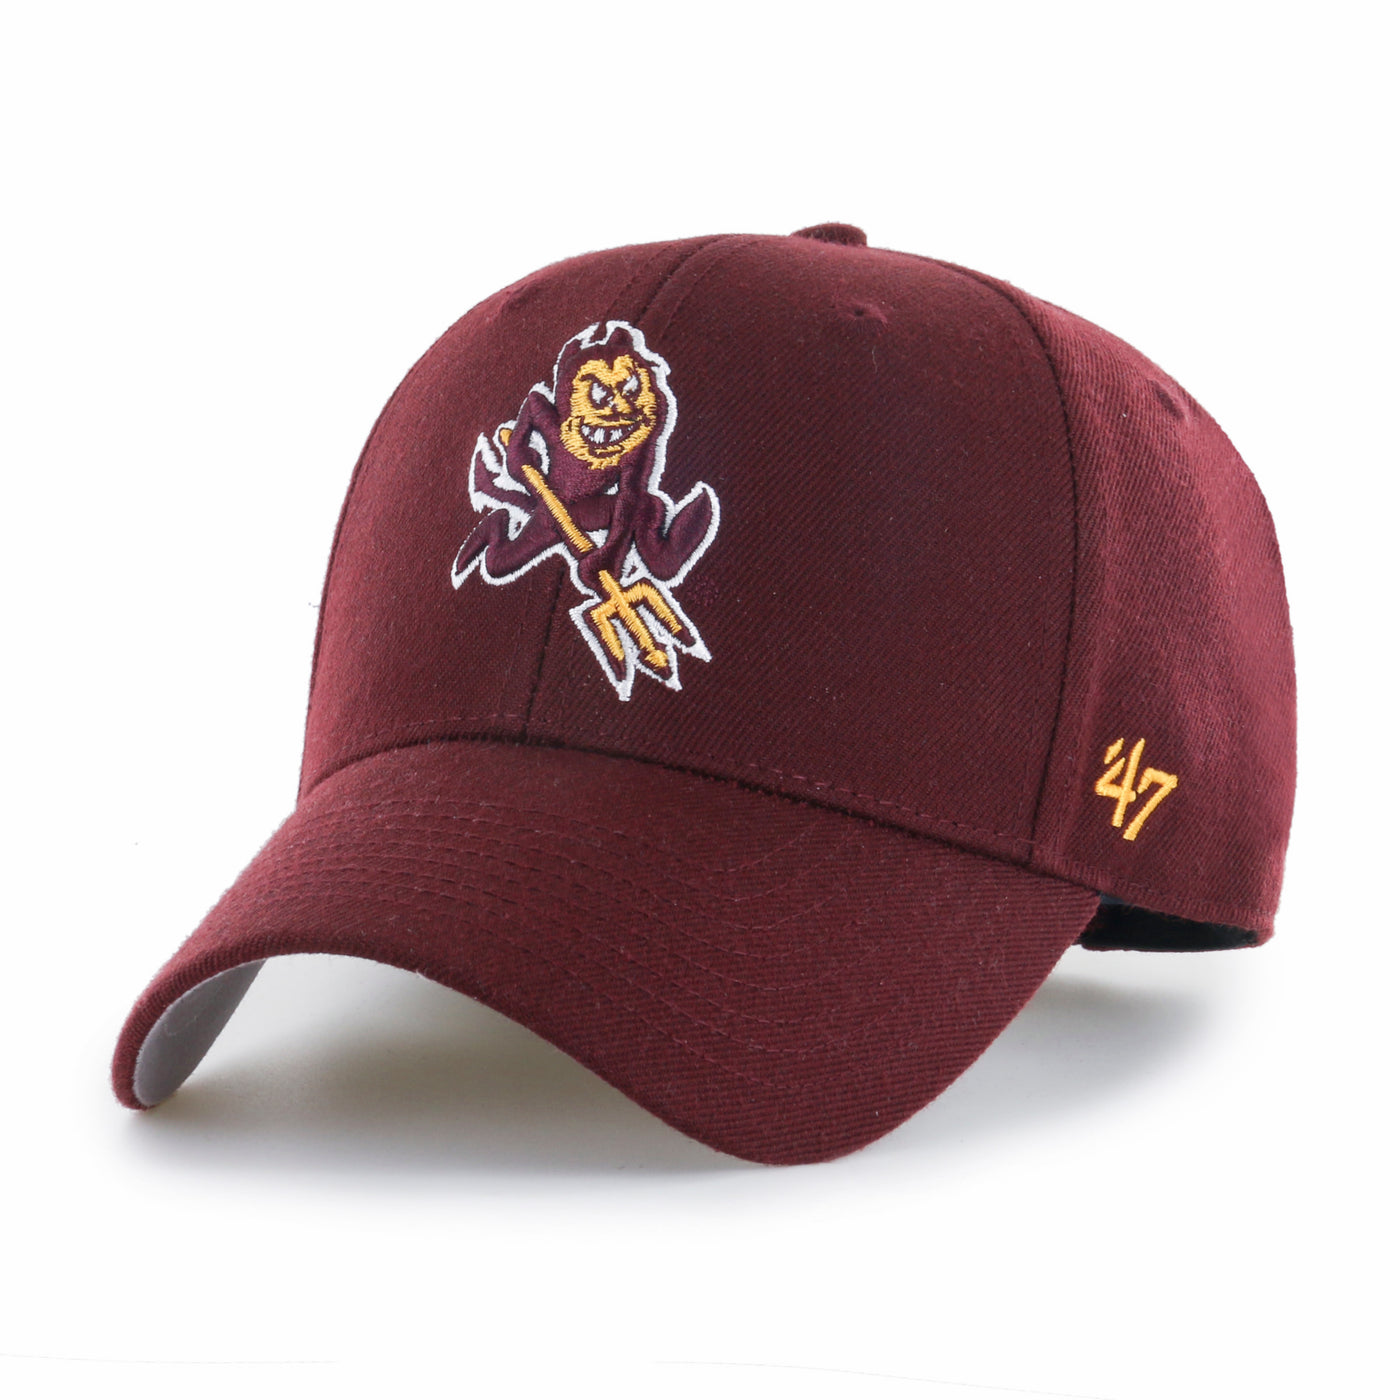 sparky on a maroon wool 47 brand ASU hat